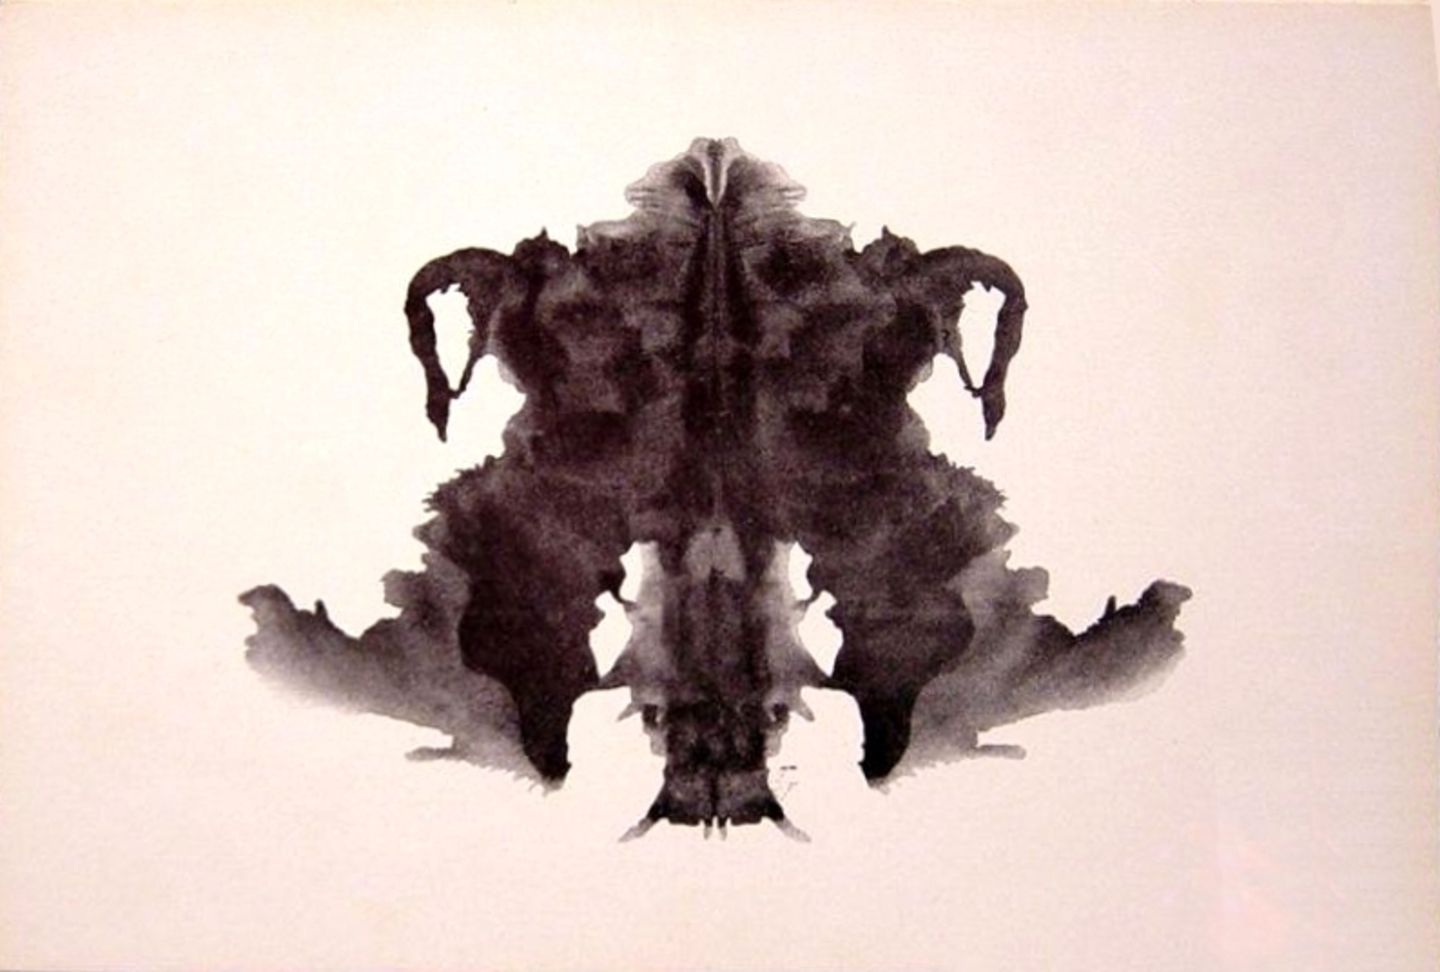 The Rorschach inkblot test relies on what you read in to the image.